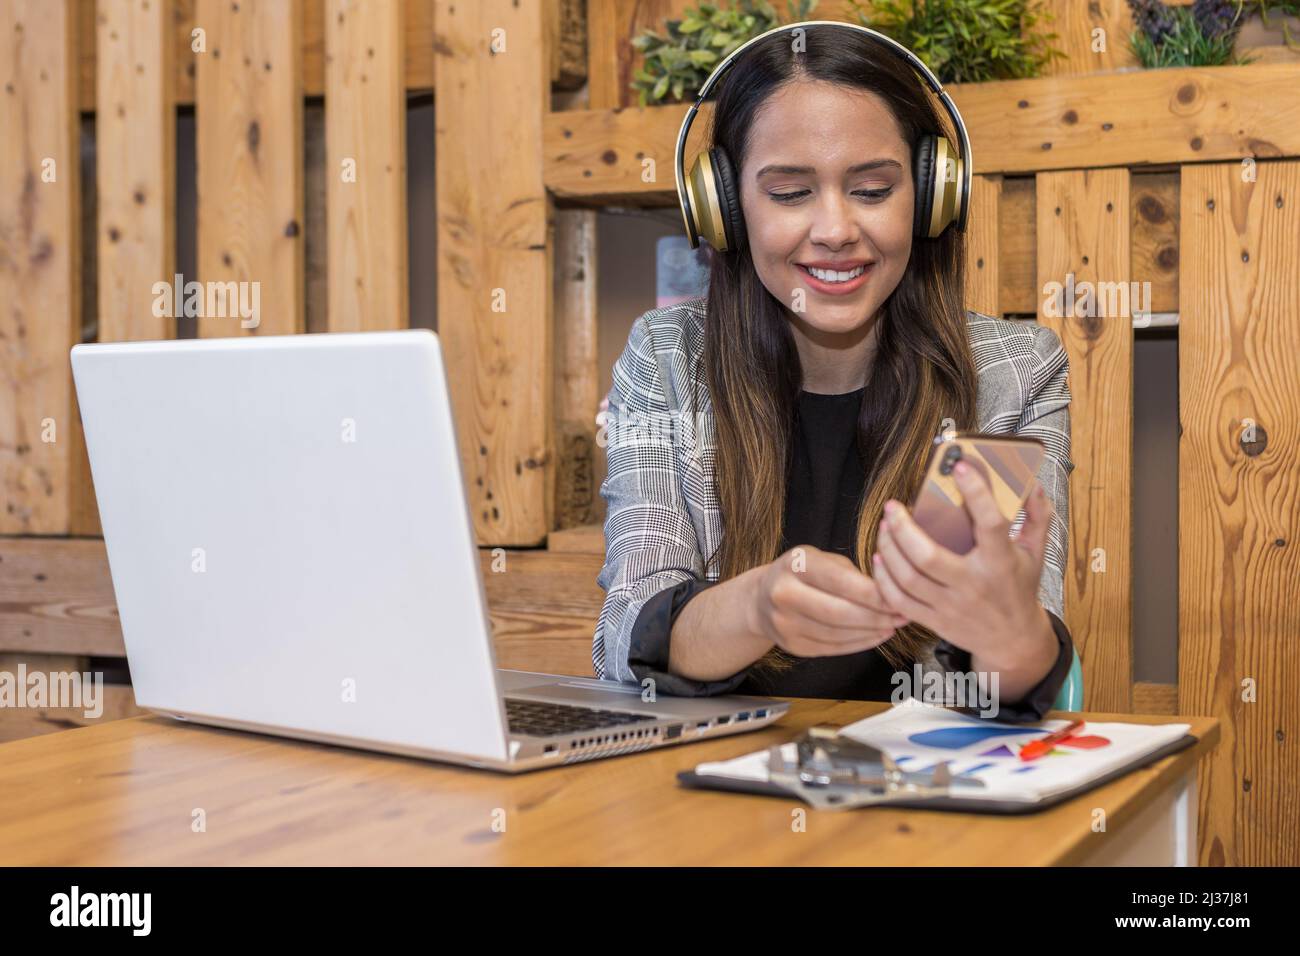 Positive female remote specialist in wireless headphones using cellphone while doing remote job on netbook at table with document on clipboard. Stock Photo